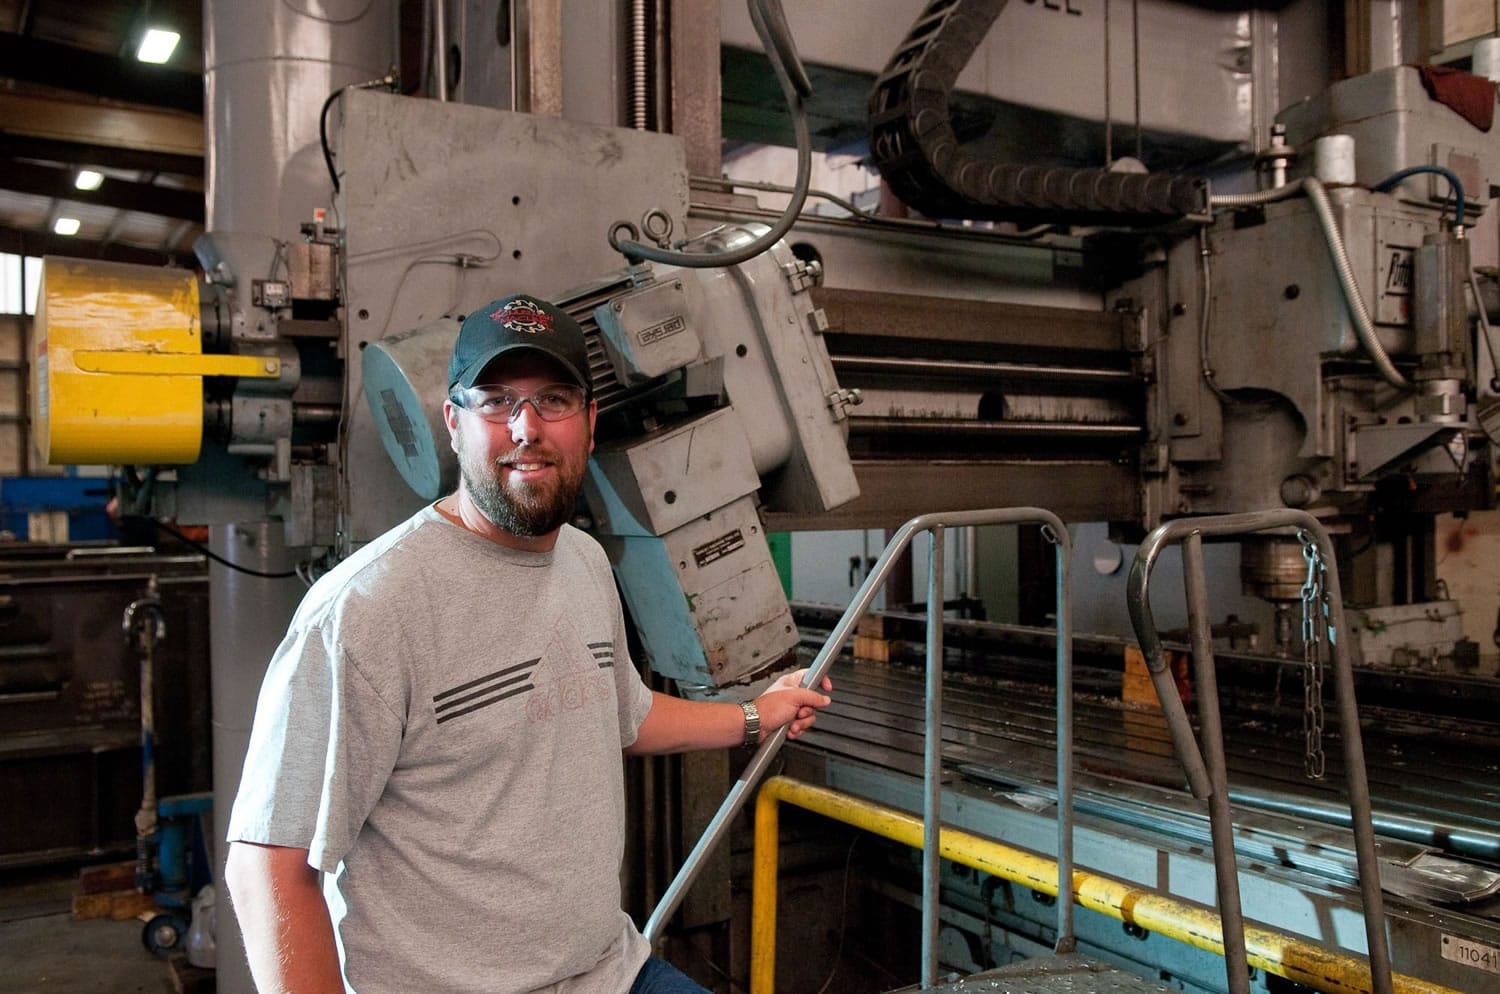 Matt Houghton is general manager of Paul Schurman Machine Inc. in Ridgefield. He made a successful pitch for a new customer, but was unable to get financing for the equipment he needed.